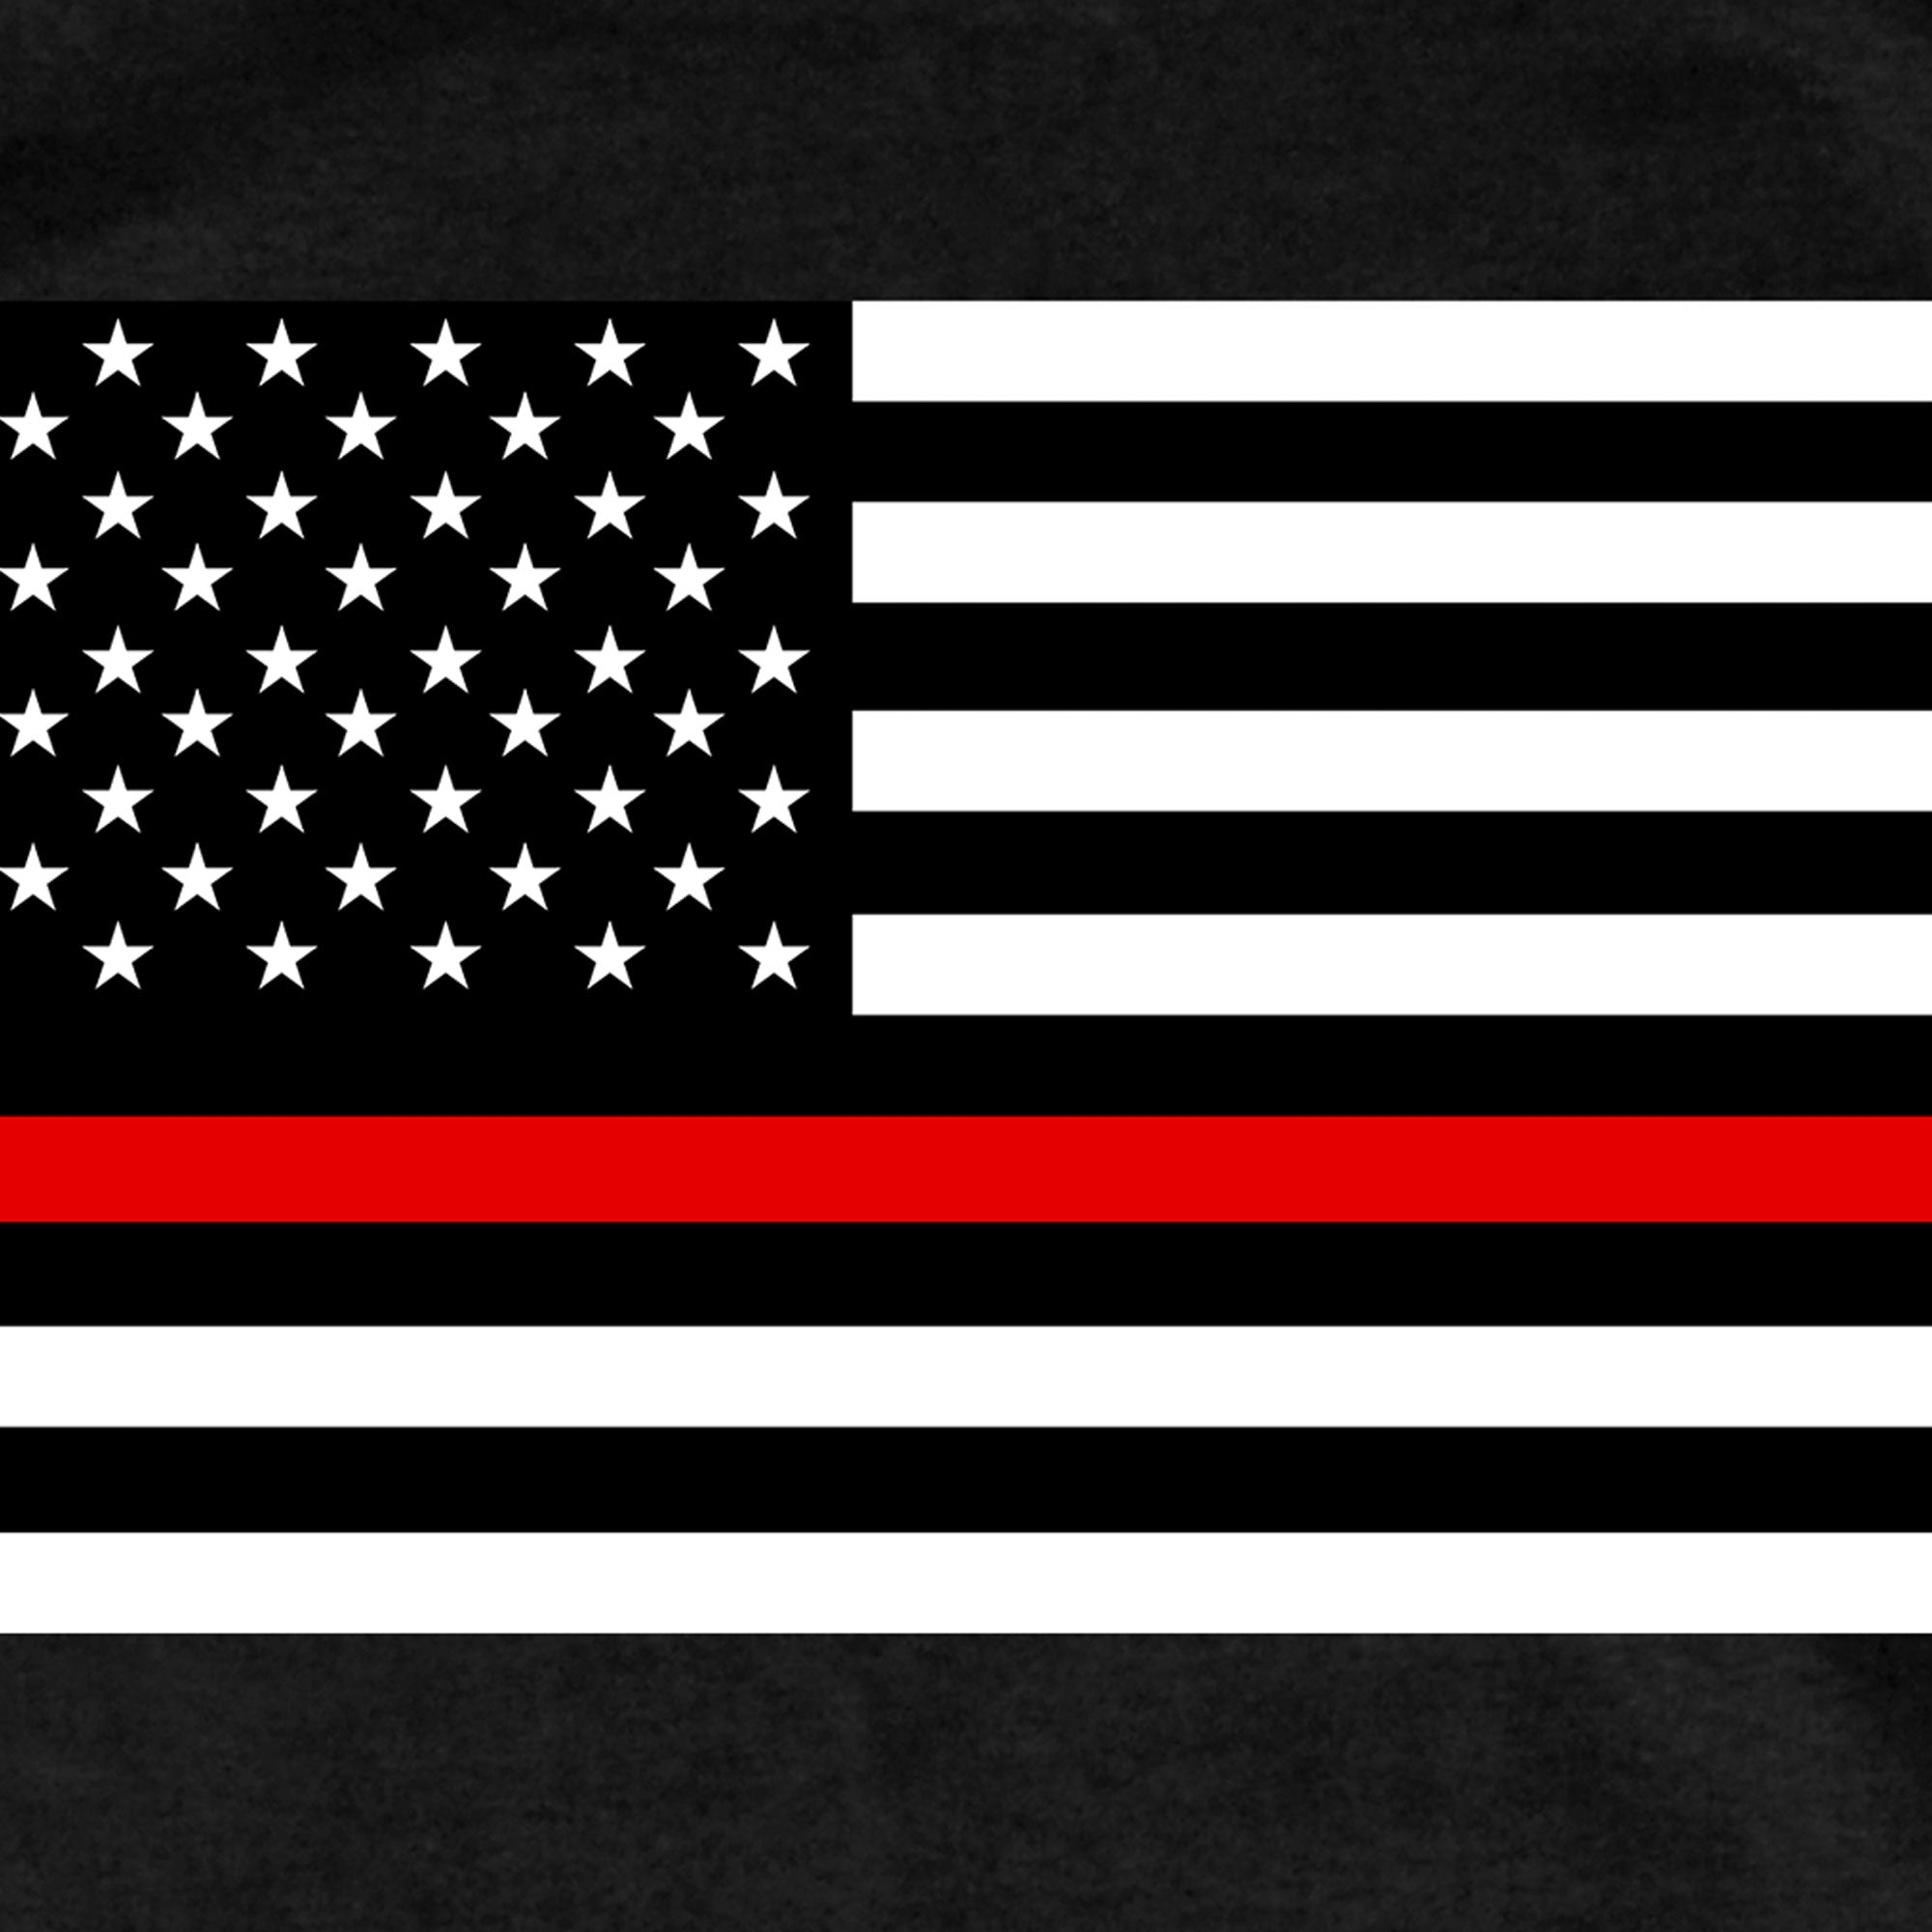 Hot Leathers GMS1446 Mens Thin Red Line USA Flag Black T-Shirt